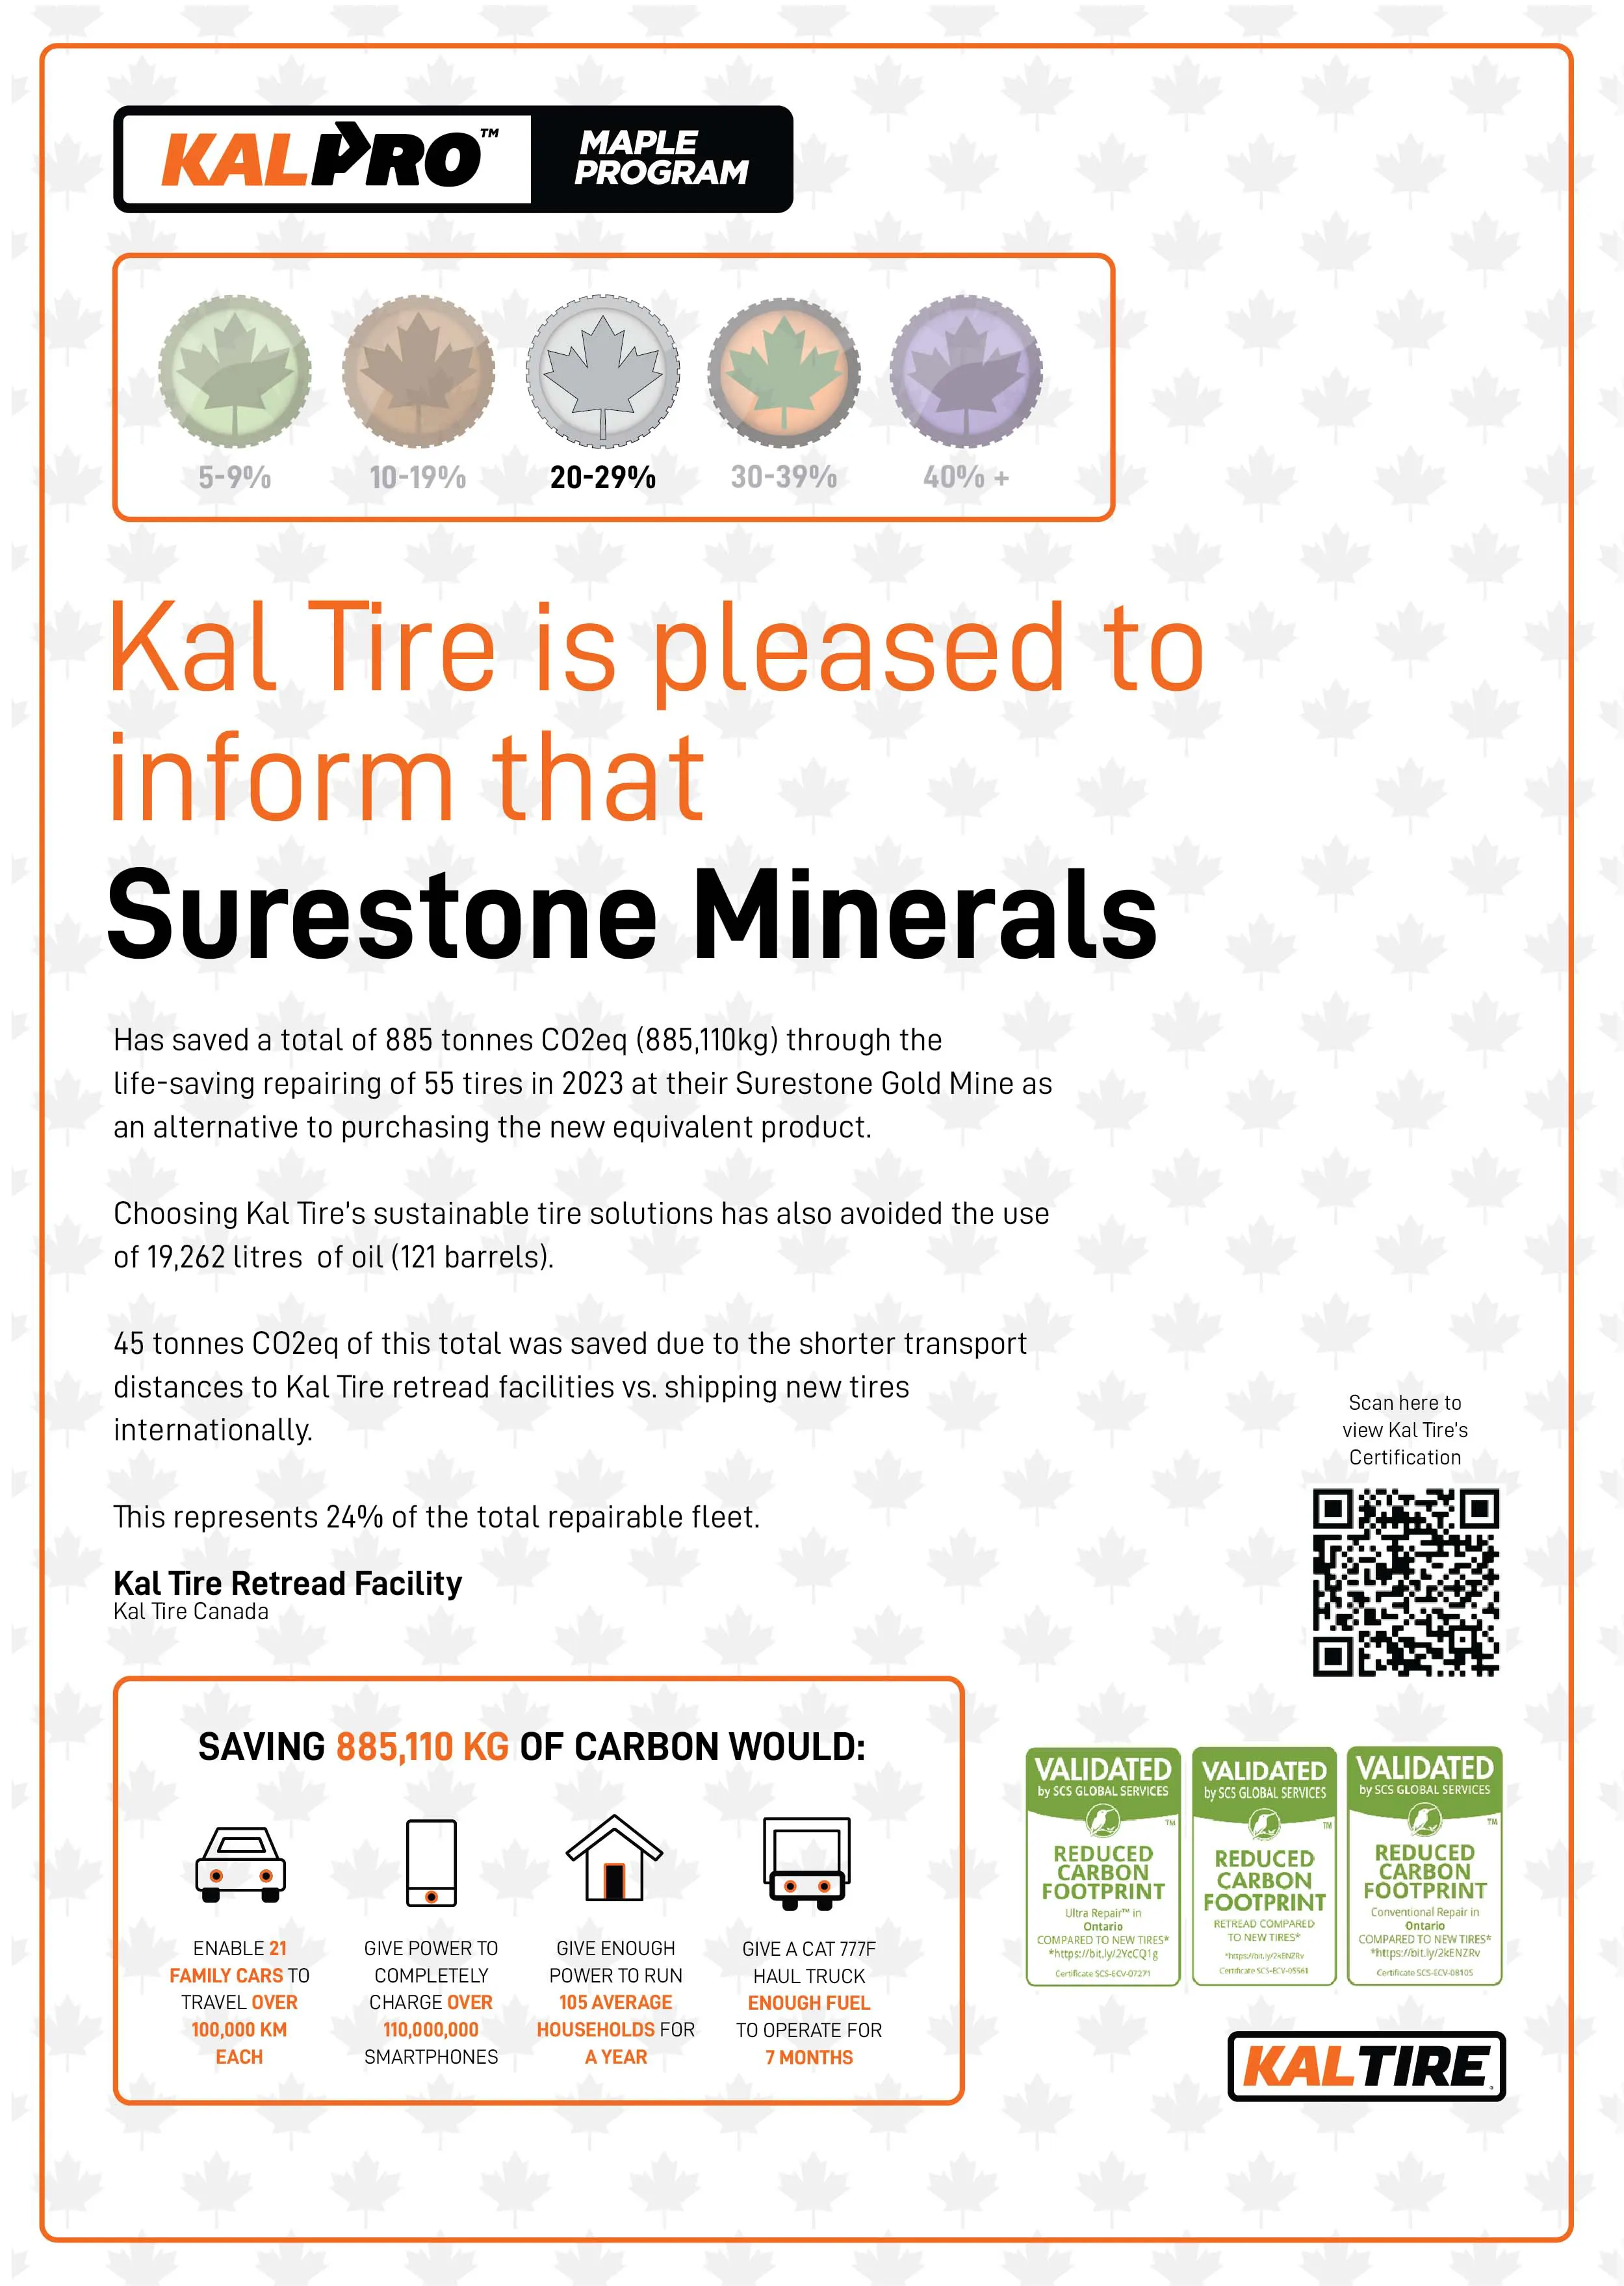 An example certificate for a Kal Tire customer. 